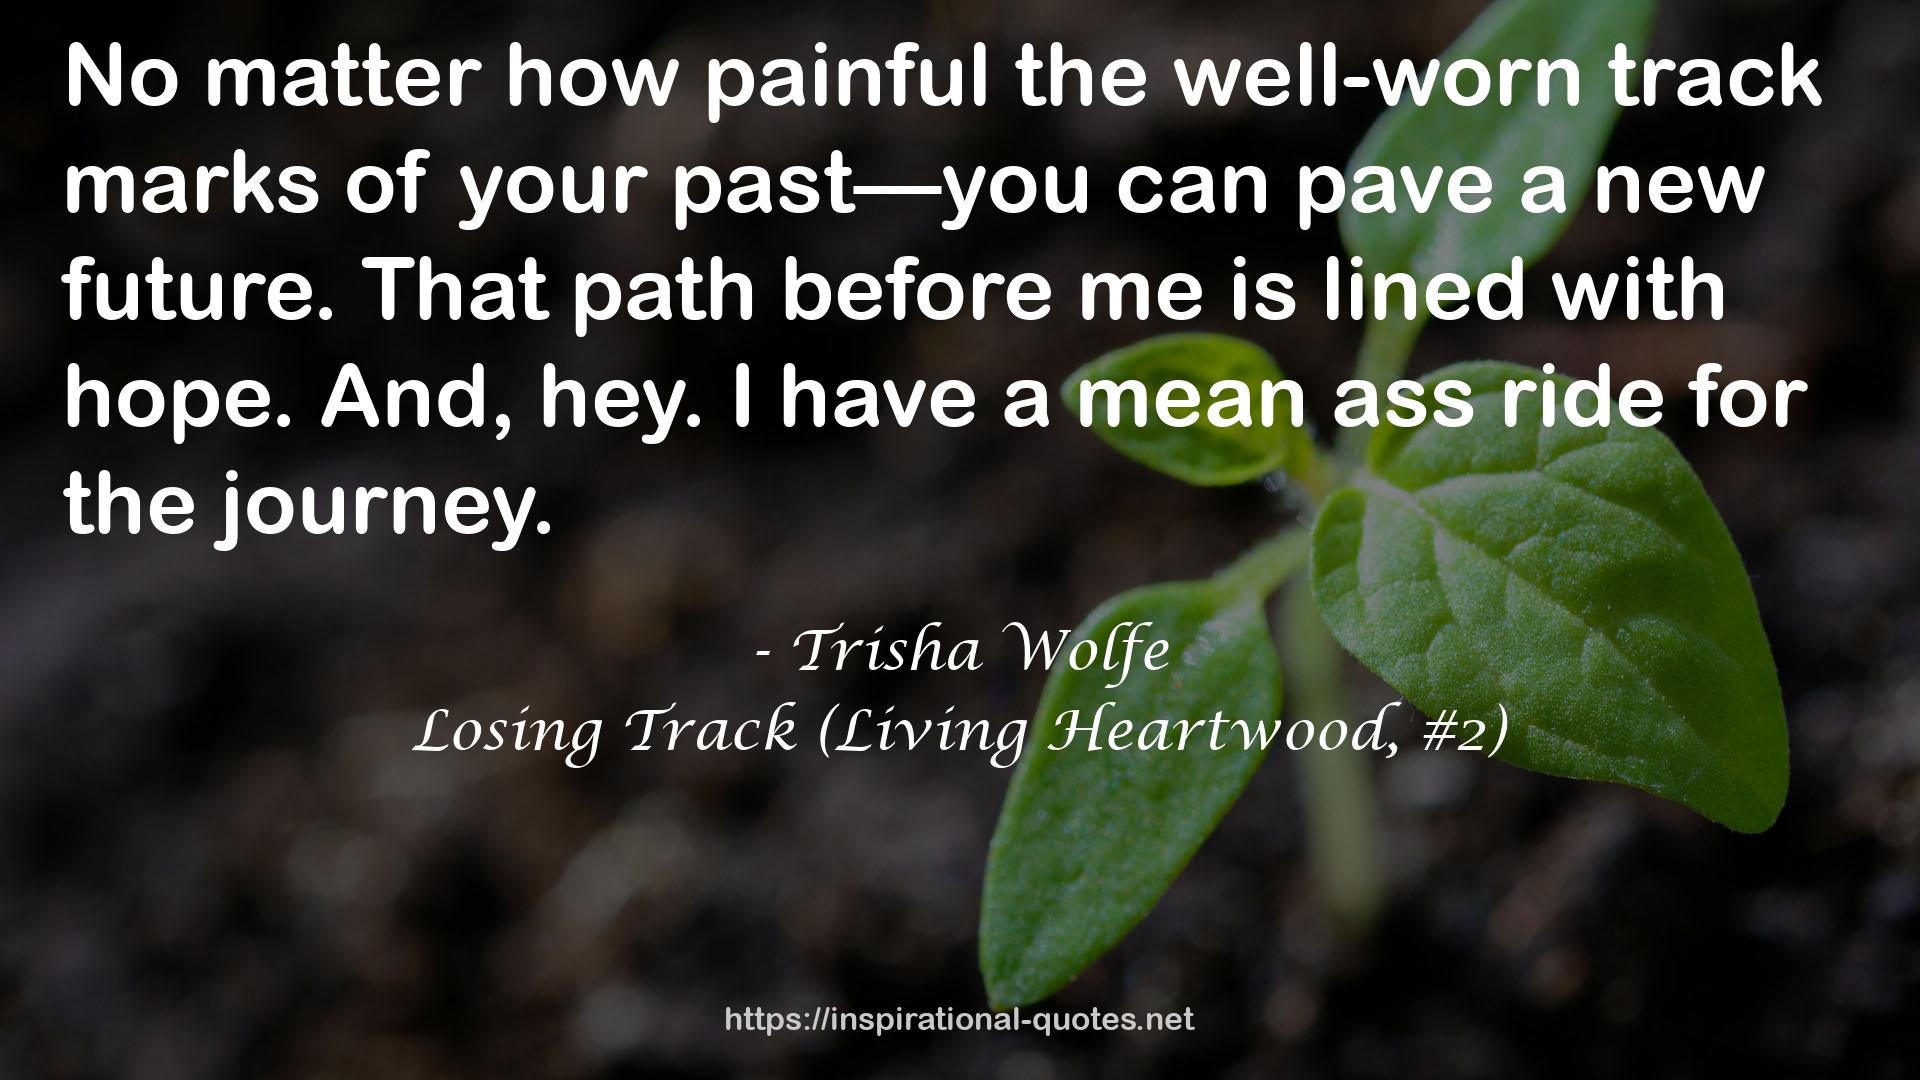 Losing Track (Living Heartwood, #2) QUOTES